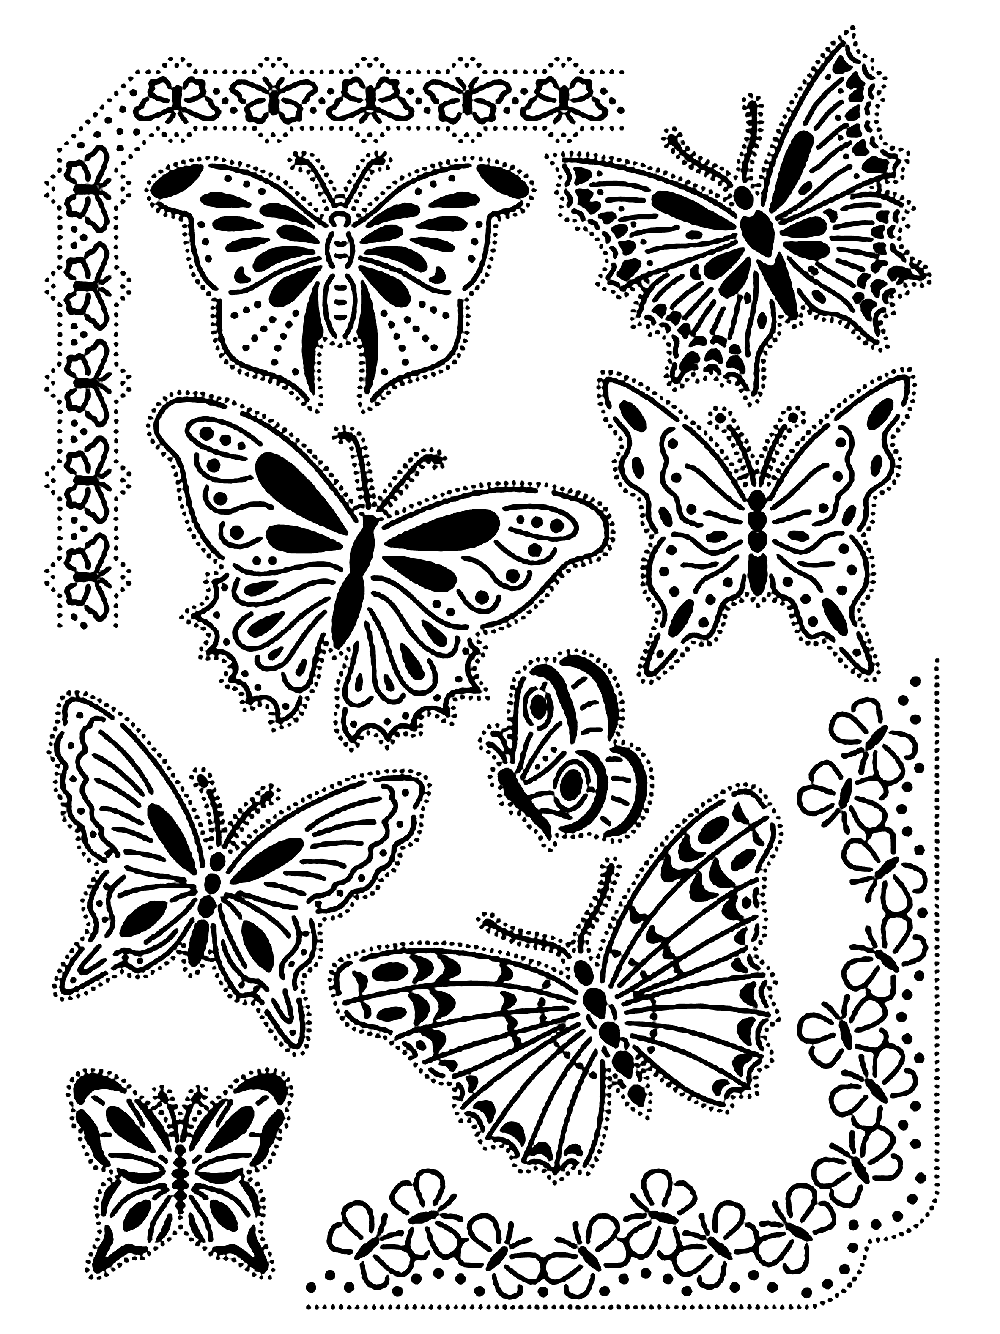 Butterflies - Insect Coloring Page